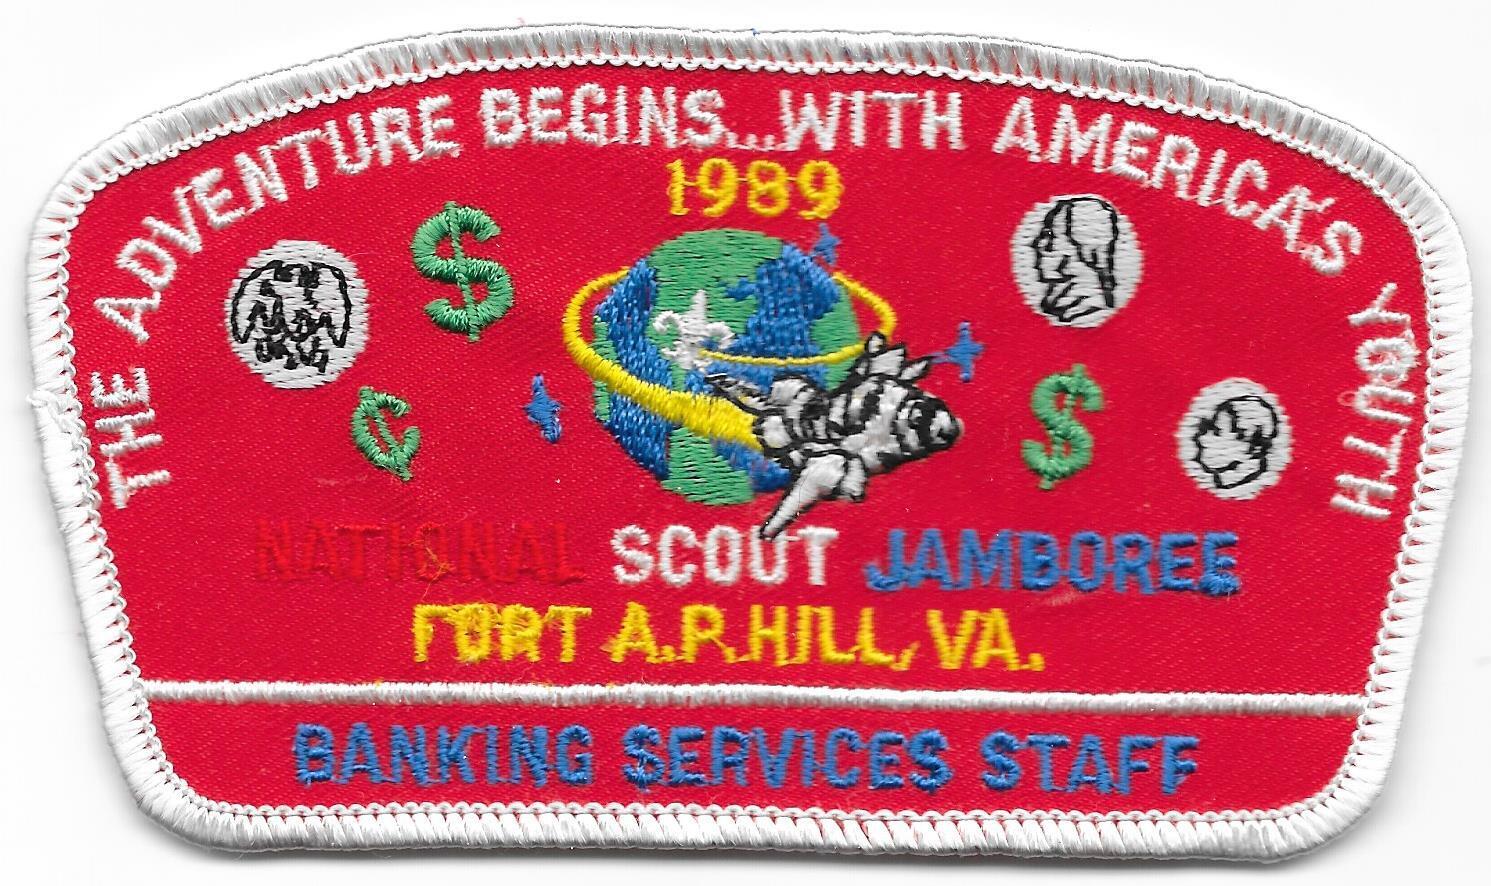 Banking Services Staff WHT Patch 1989 National Jamboree Boy Scouts of America BP